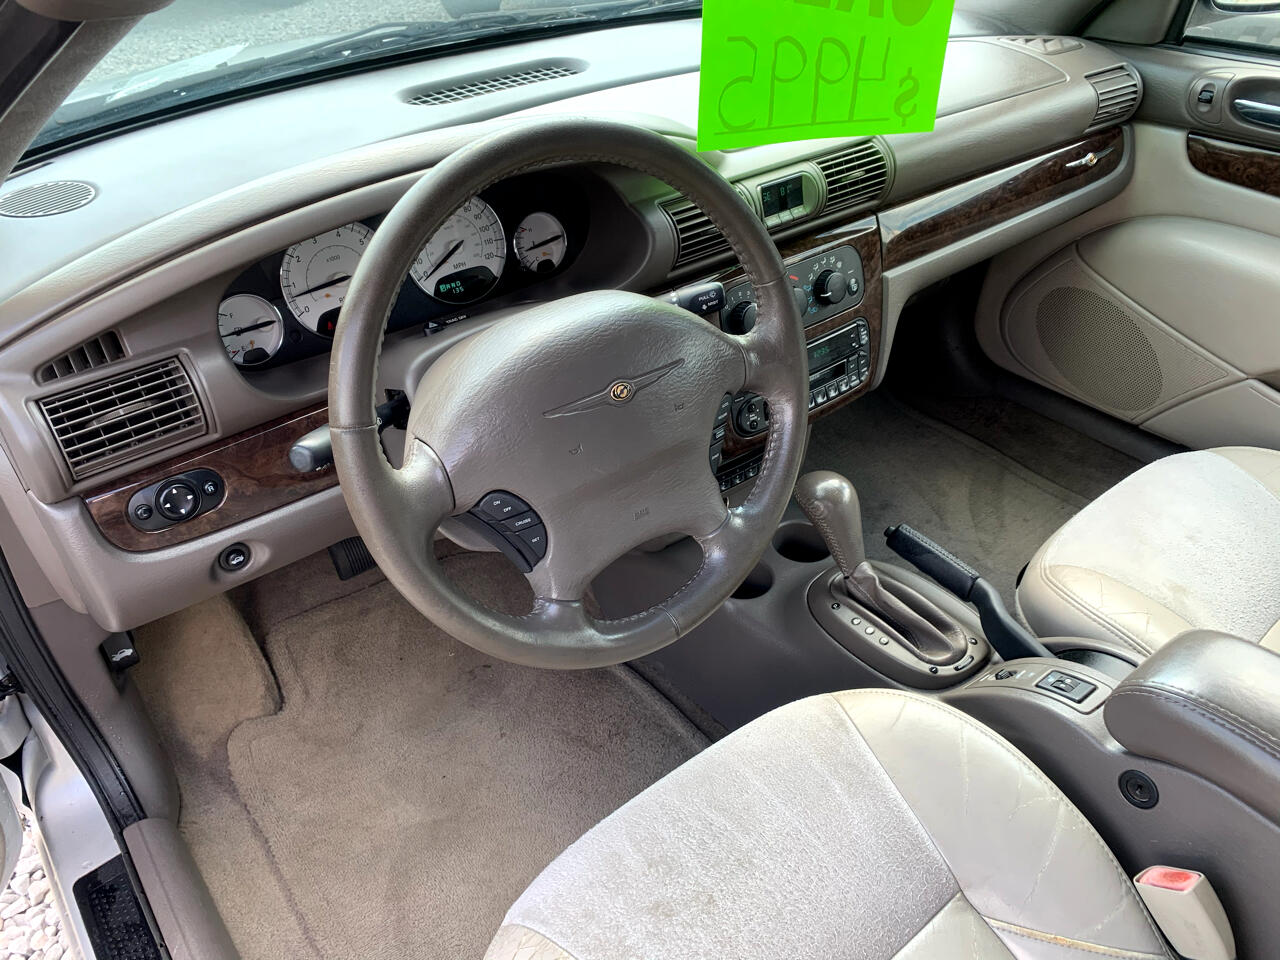 Used 2004 Chrysler Sebring LIMITED for Sale in Columbia Station OH 44028  Southern Used Cars & Trucks